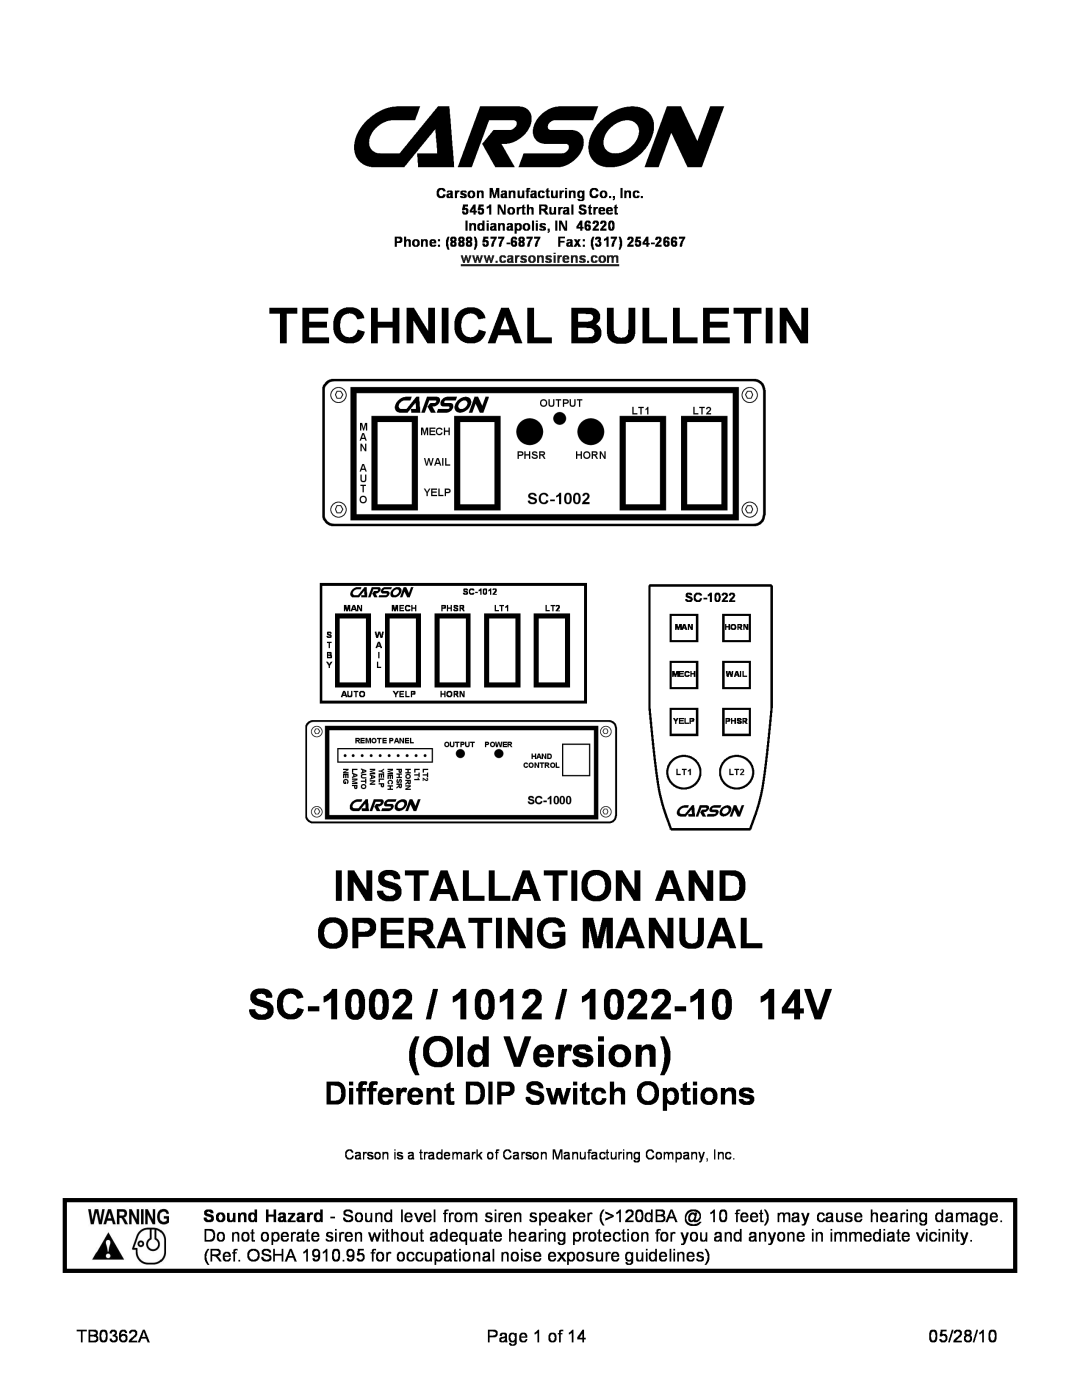 Carson 1022-10 14 V manual Technical Bulletin, INSTALLATION AND OPERATING MANUAL SC-1002 / 1012 / 1022-10, Old Version 